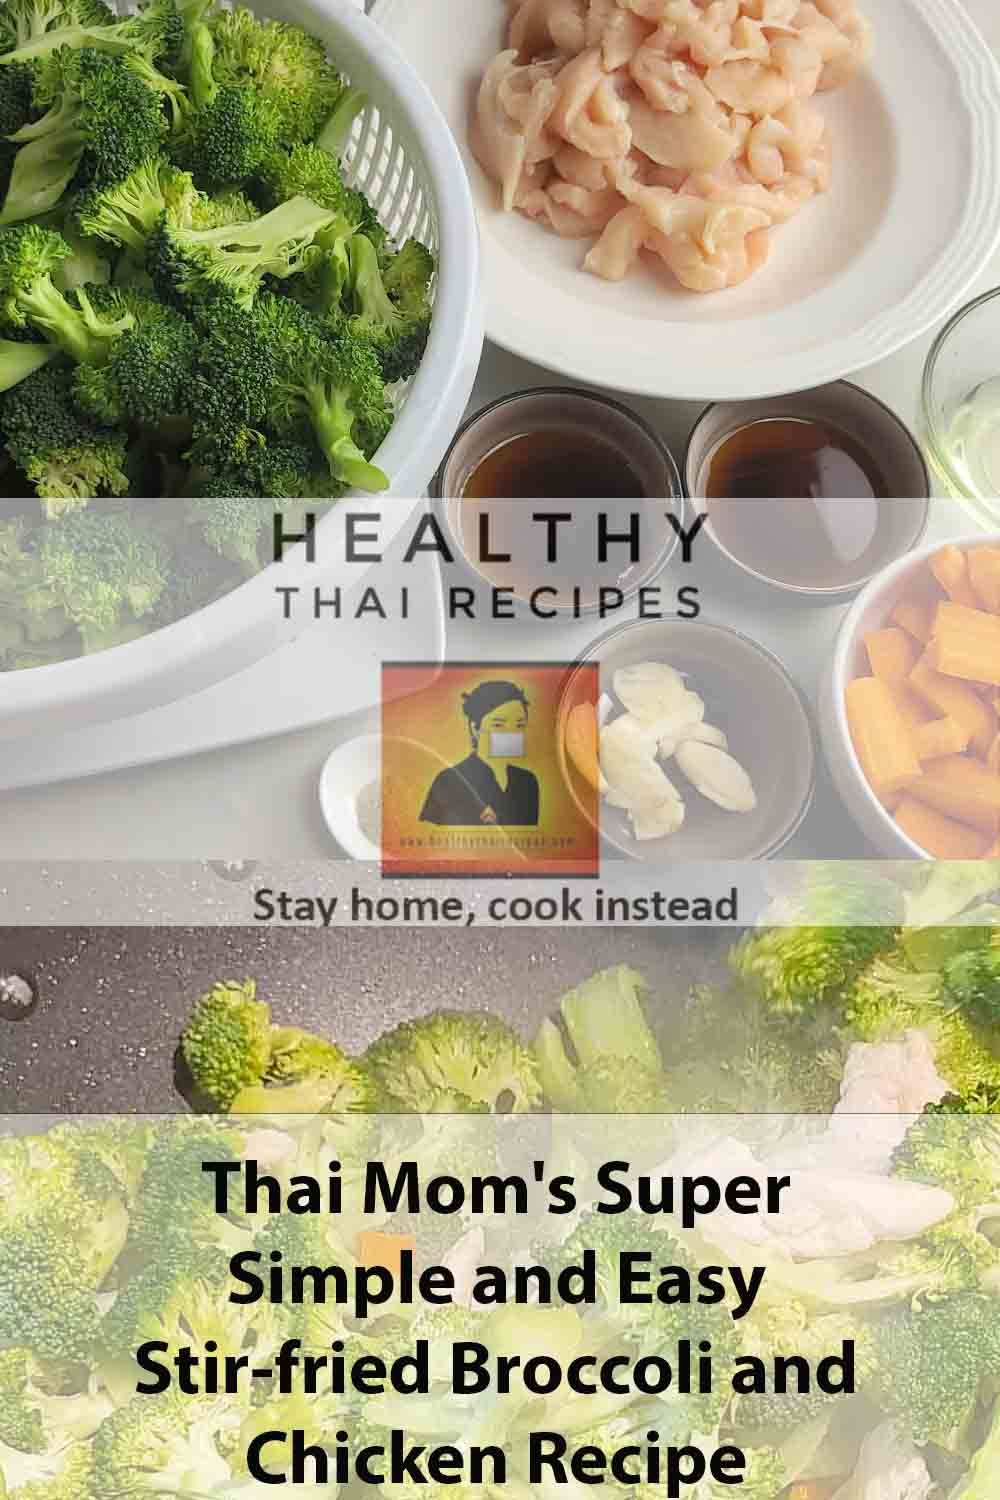 Thai Mom's Super Simple and Easy Stir-fried Broccoli and Chicken Recipe Pinterest Image